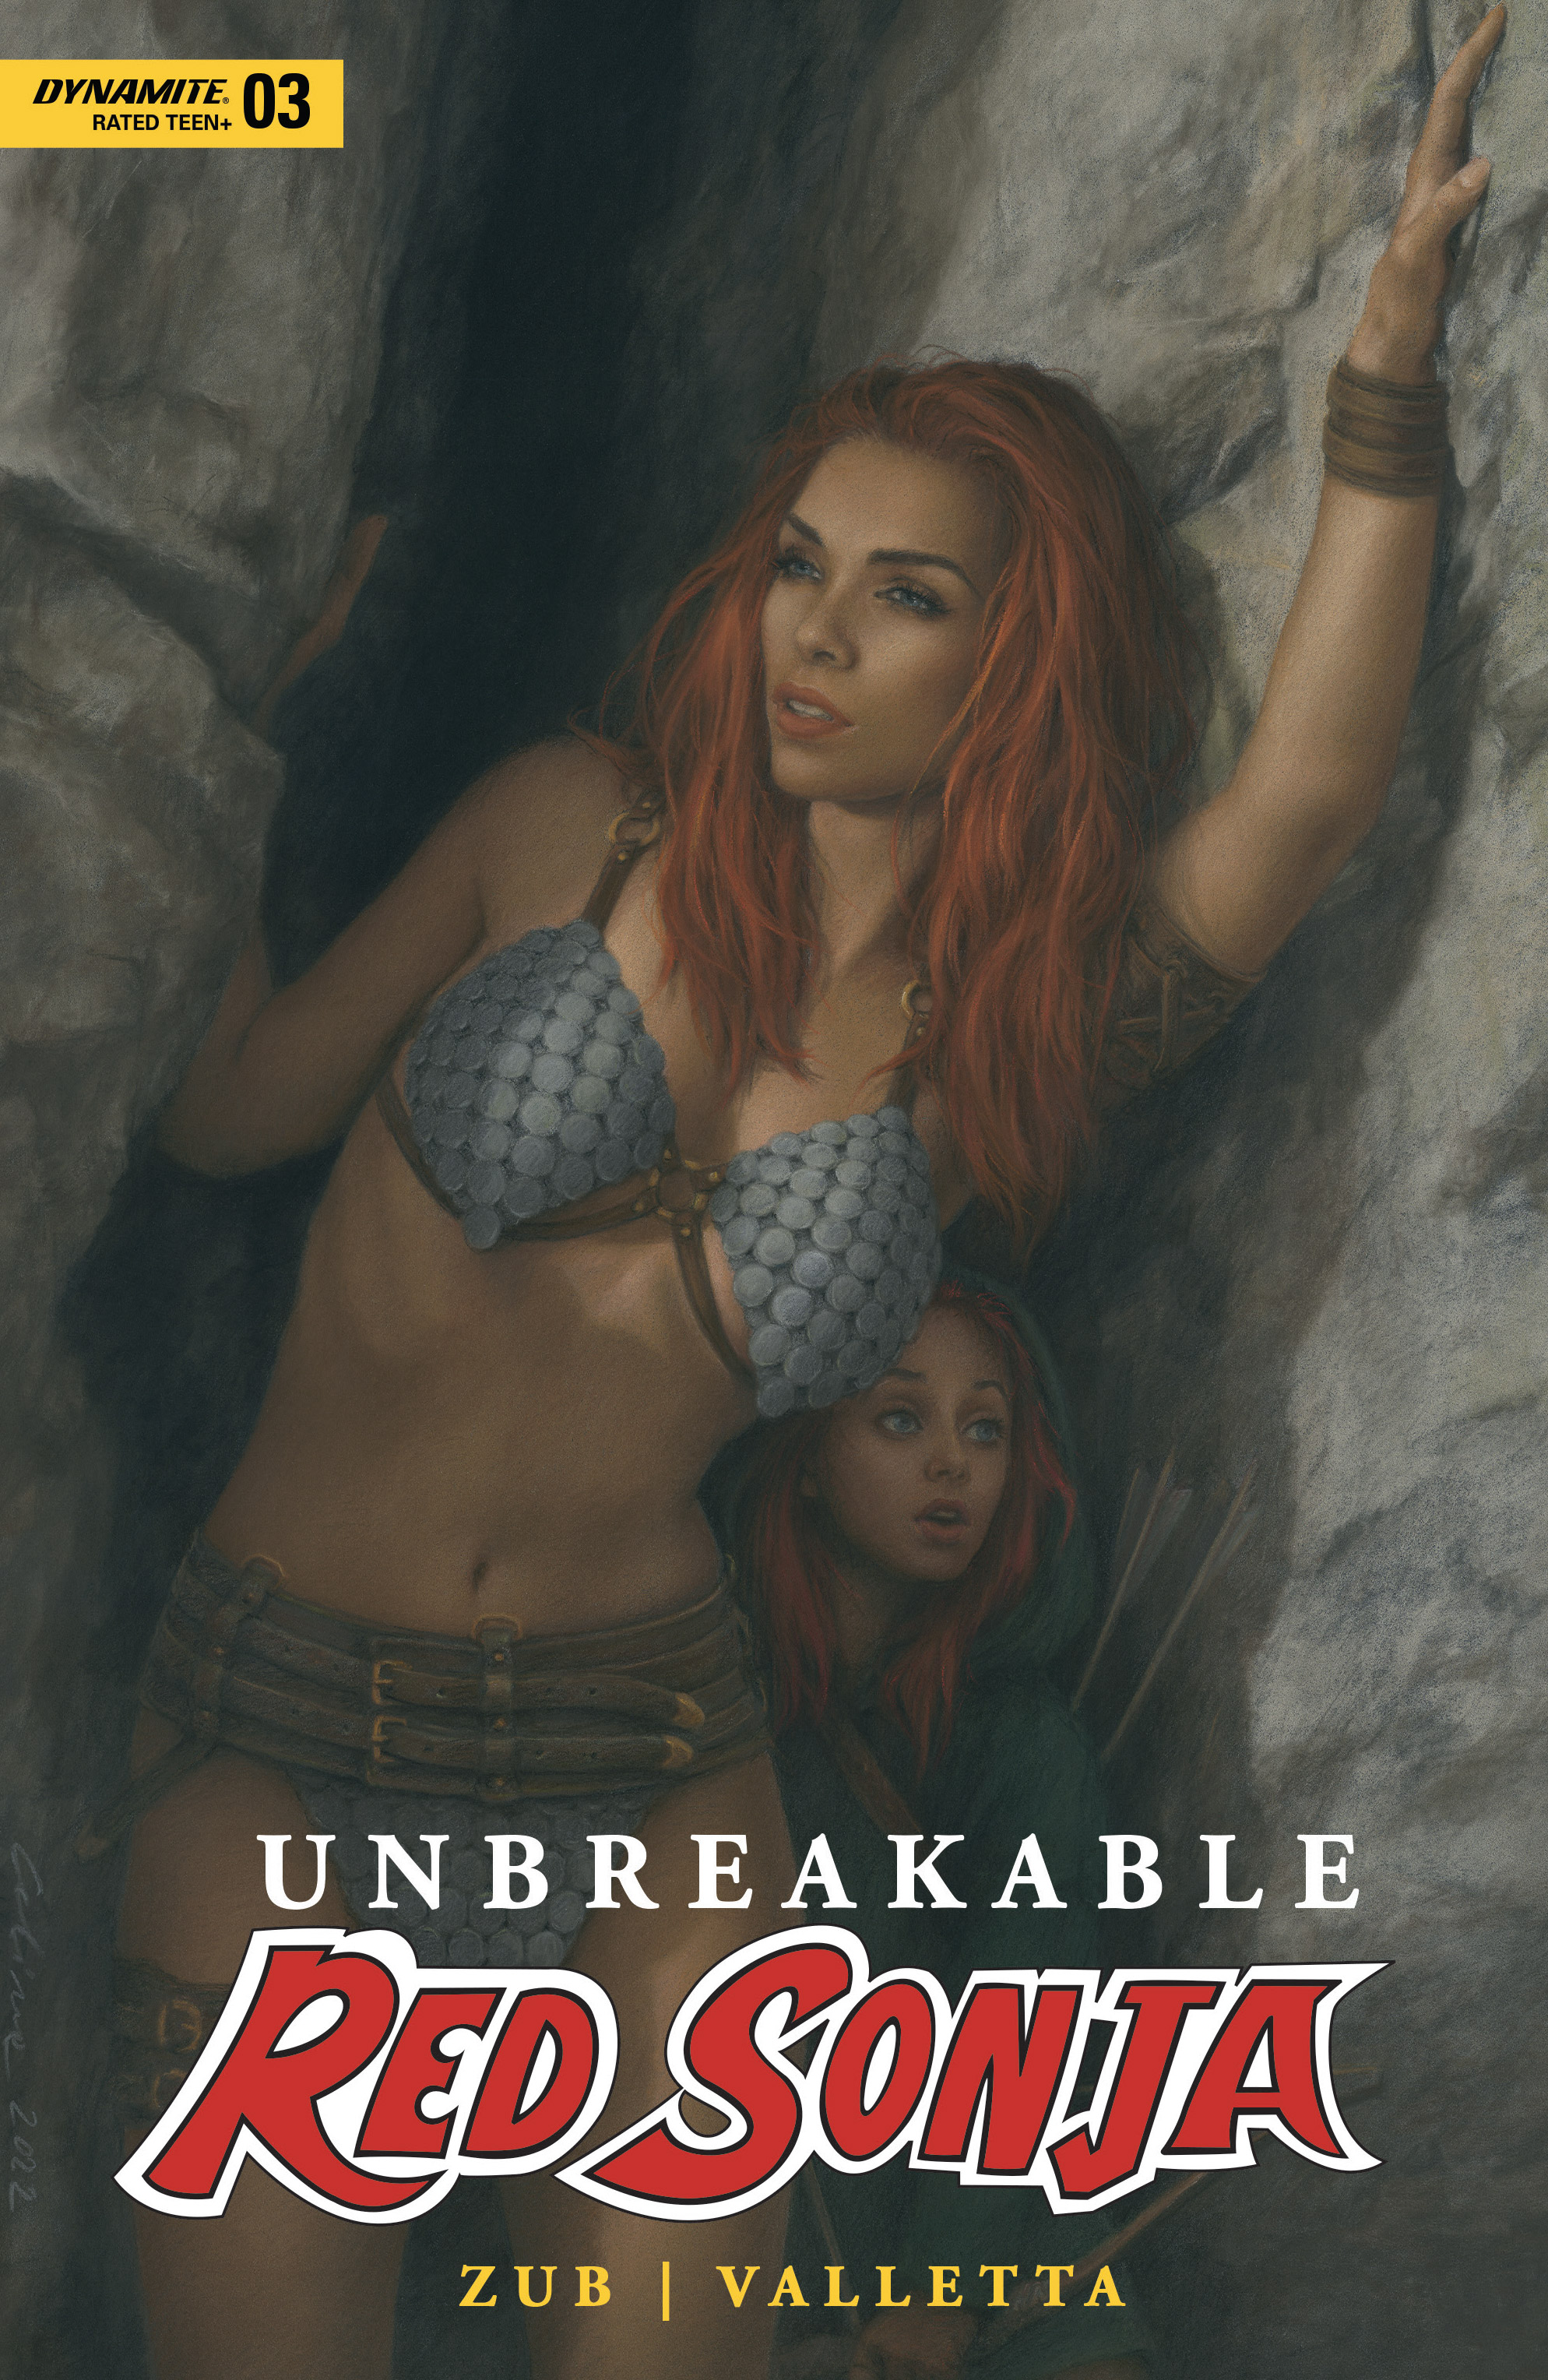 Read online Unbreakable Red Sonja comic -  Issue #3 - 2